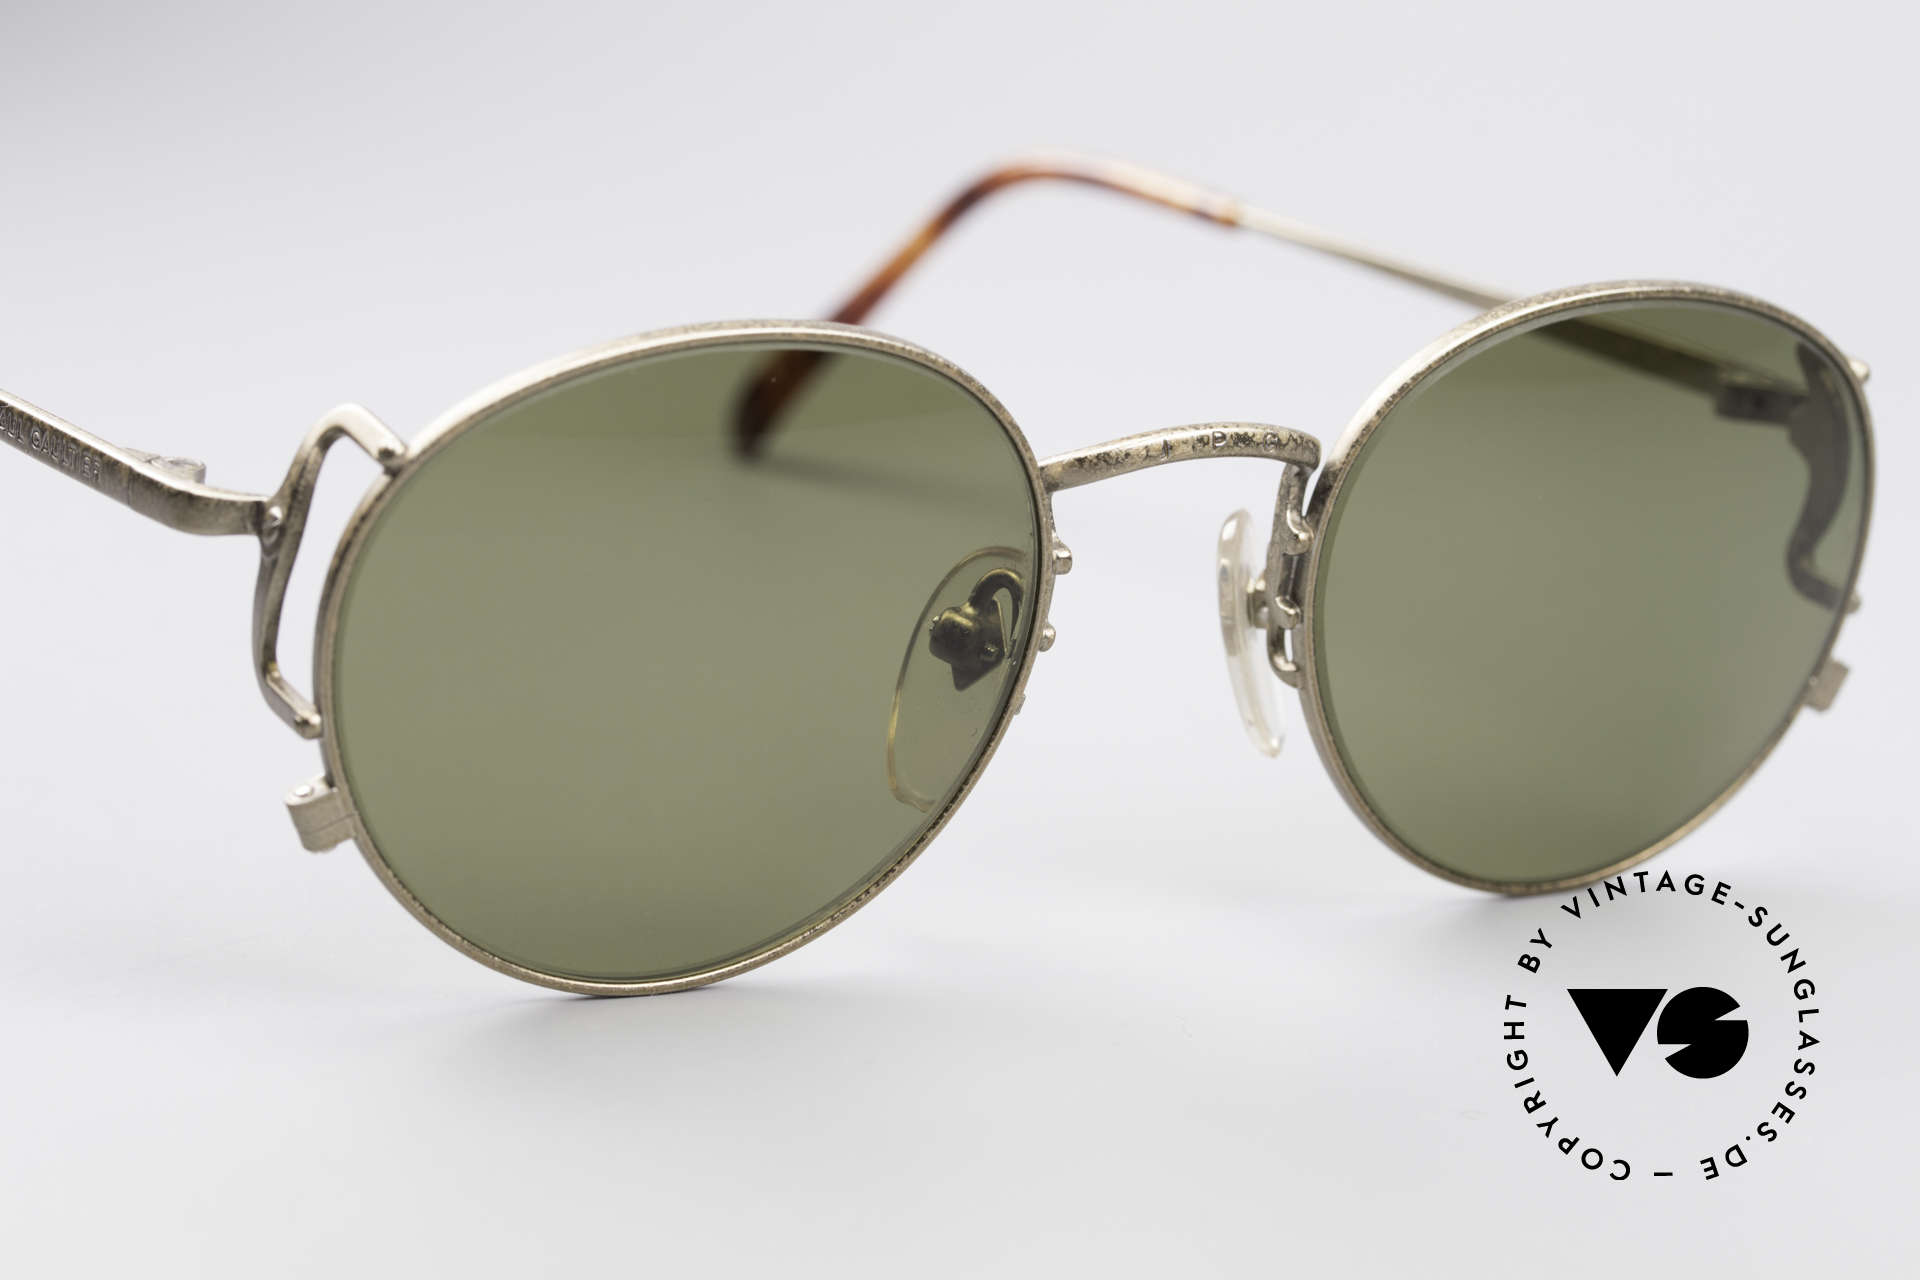 Jean Paul Gaultier 55-3178 Polarized Sun Lenses, NO retro sunglasses, but a 25 years old original, Made for Men and Women